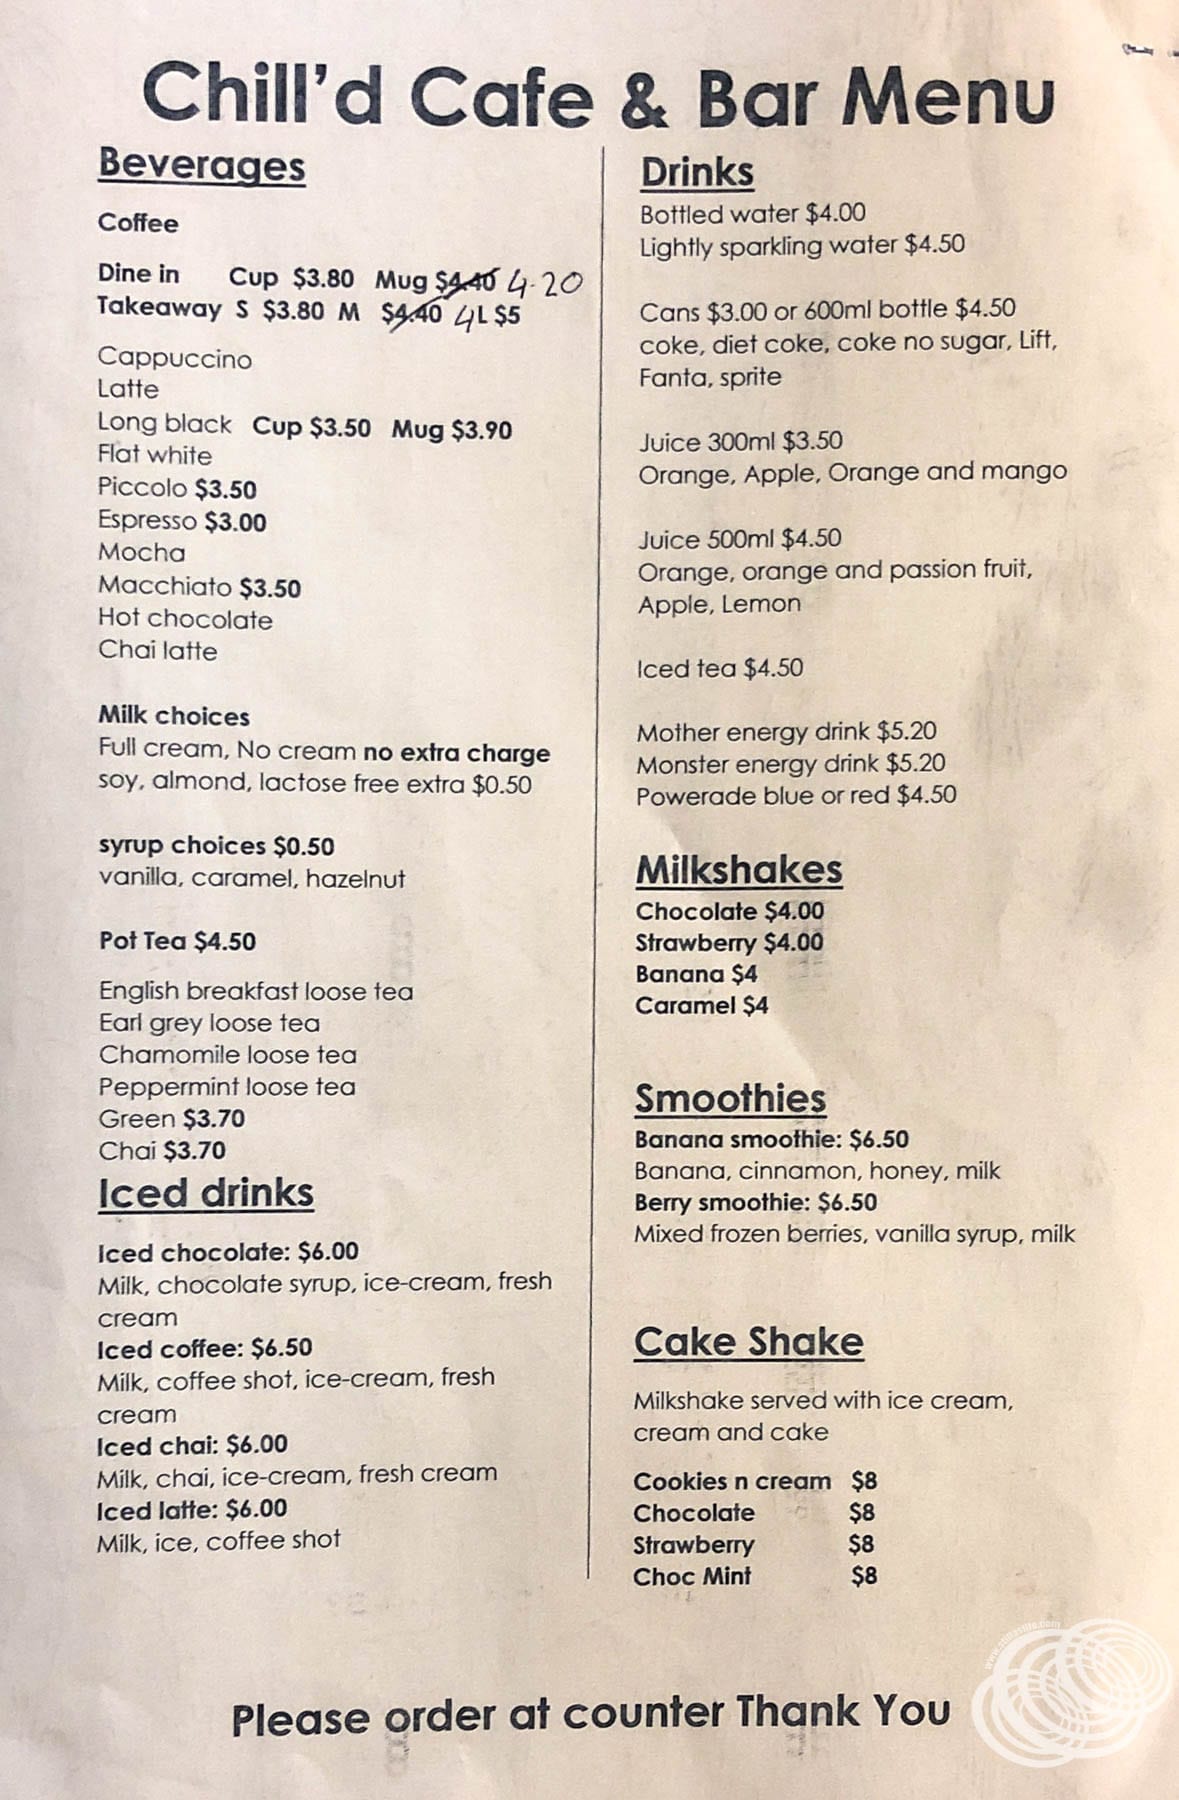 Chill'd Cafe and Bar Menu - Page 4